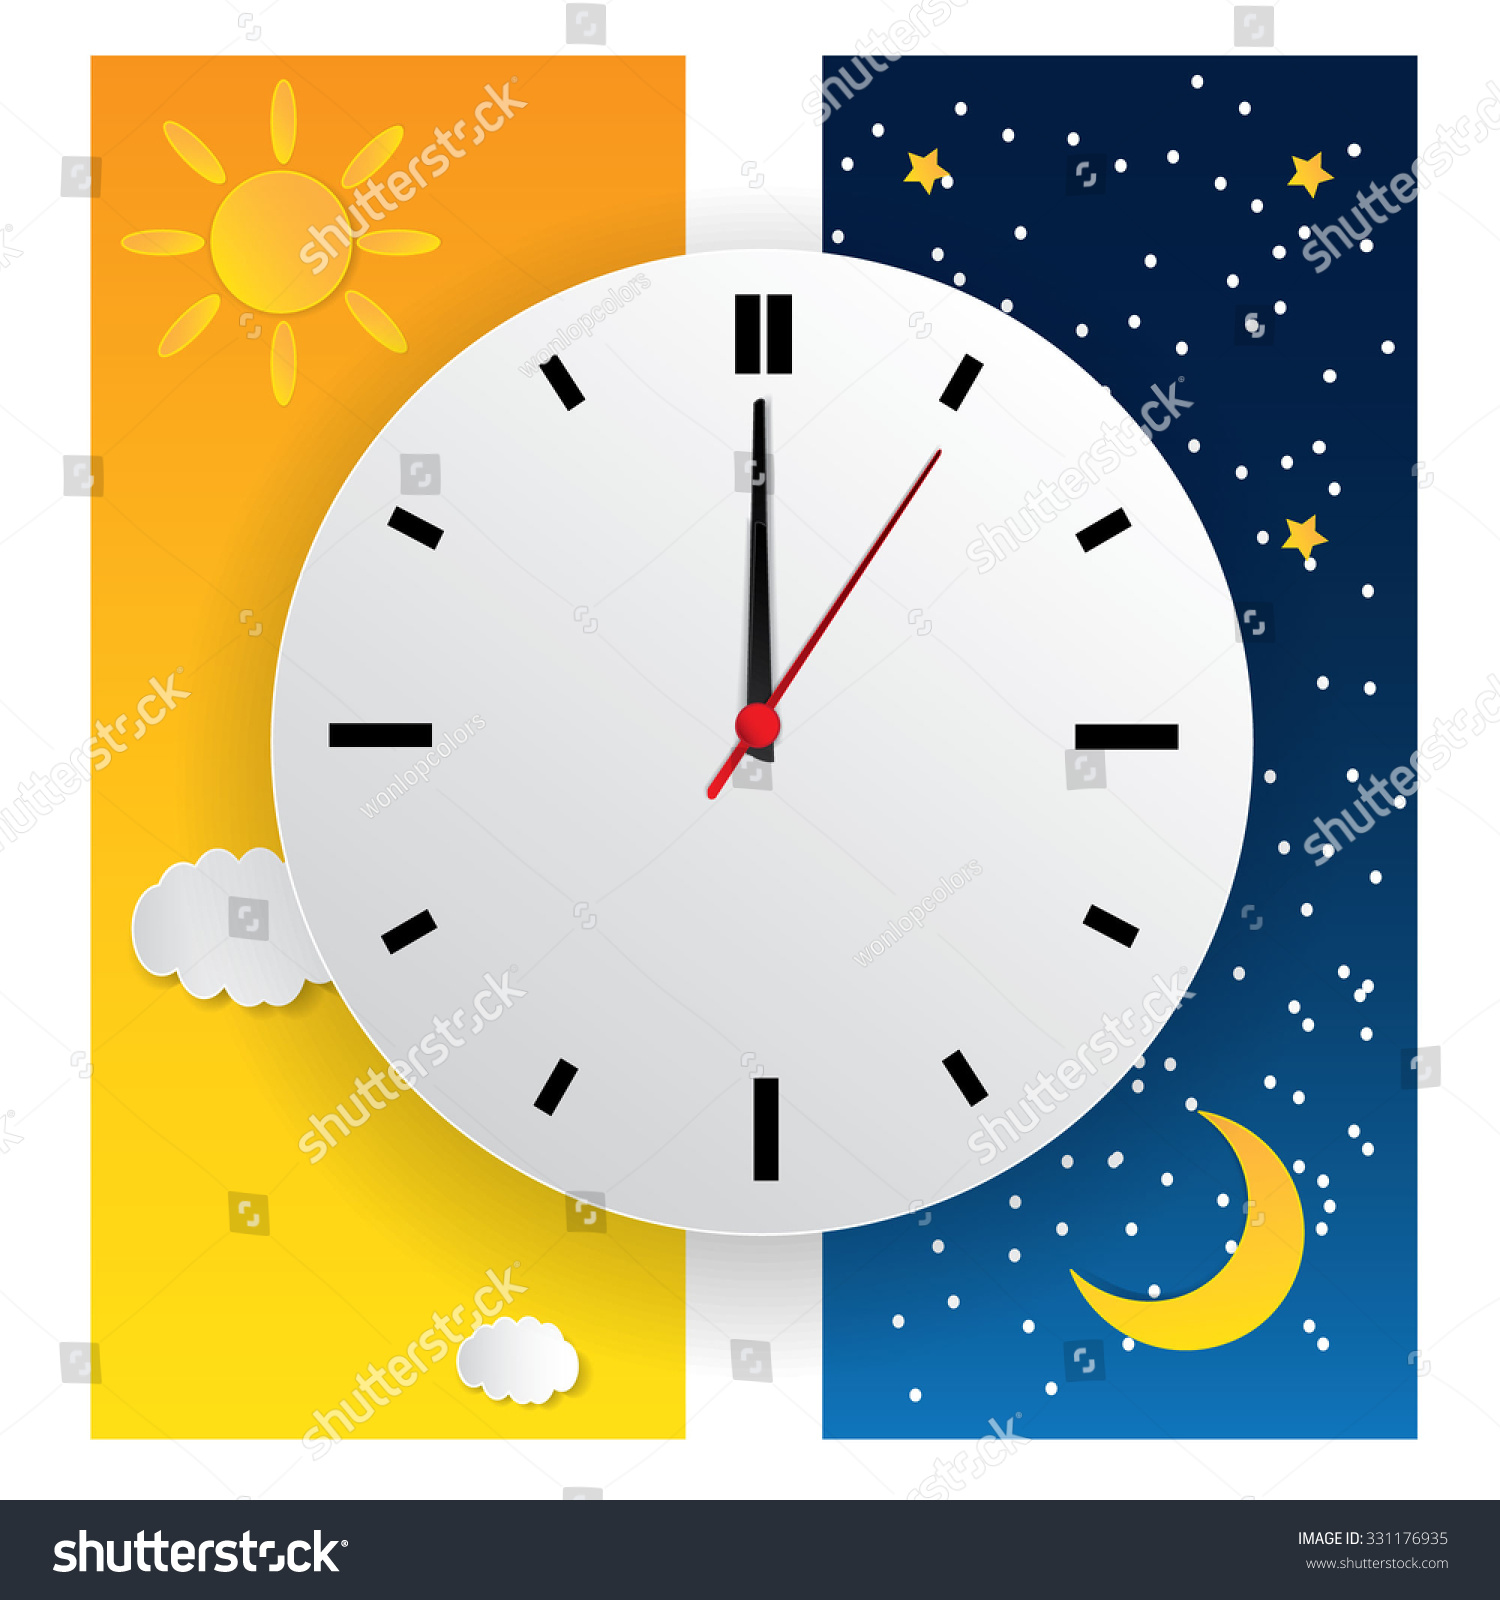 day and night clipart free - photo #17